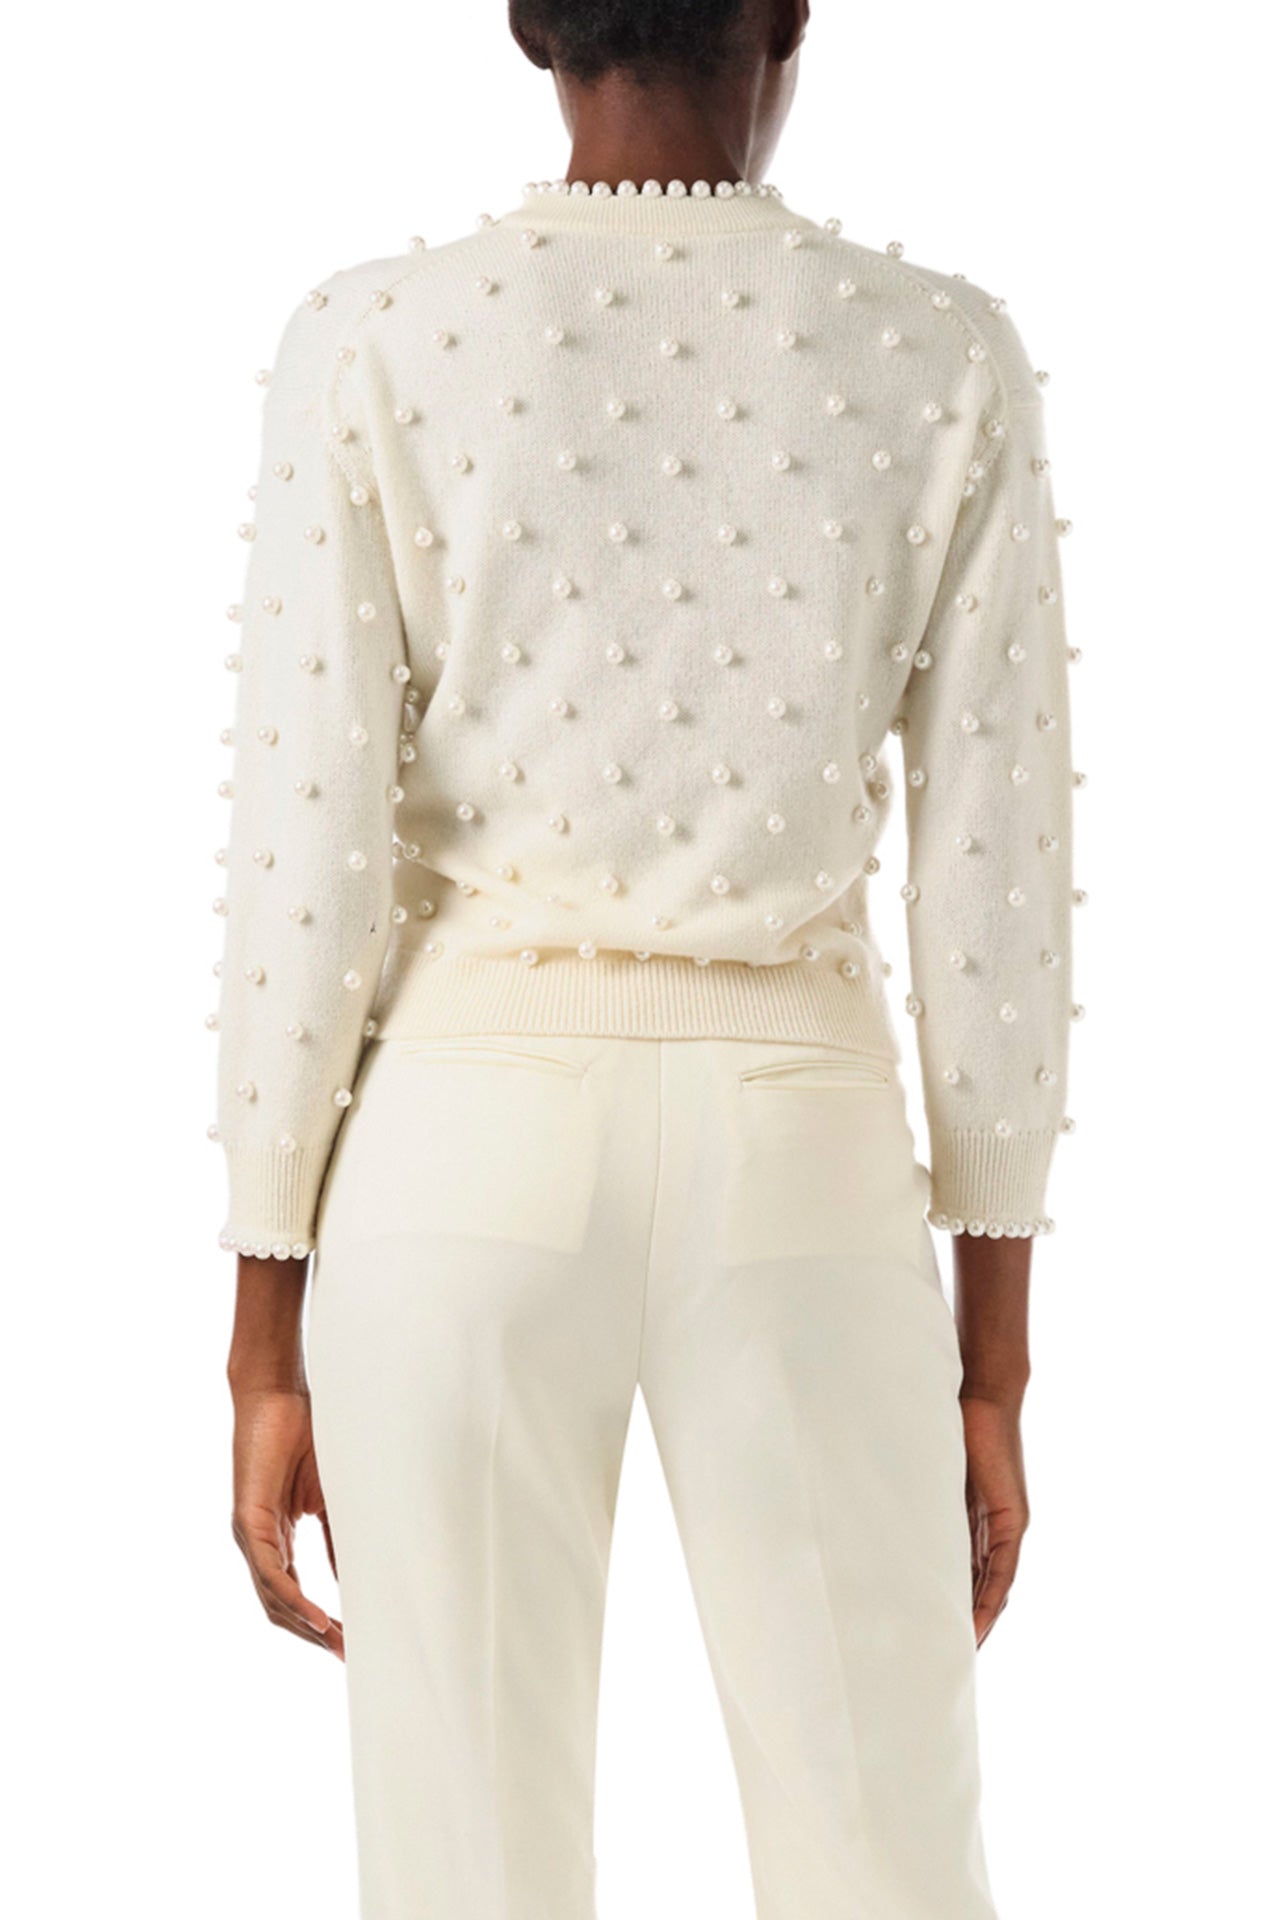 Monique Lhuillier Fall 2024 creme cashmere long sleeve sweater with pearl embroidery and trim - back.